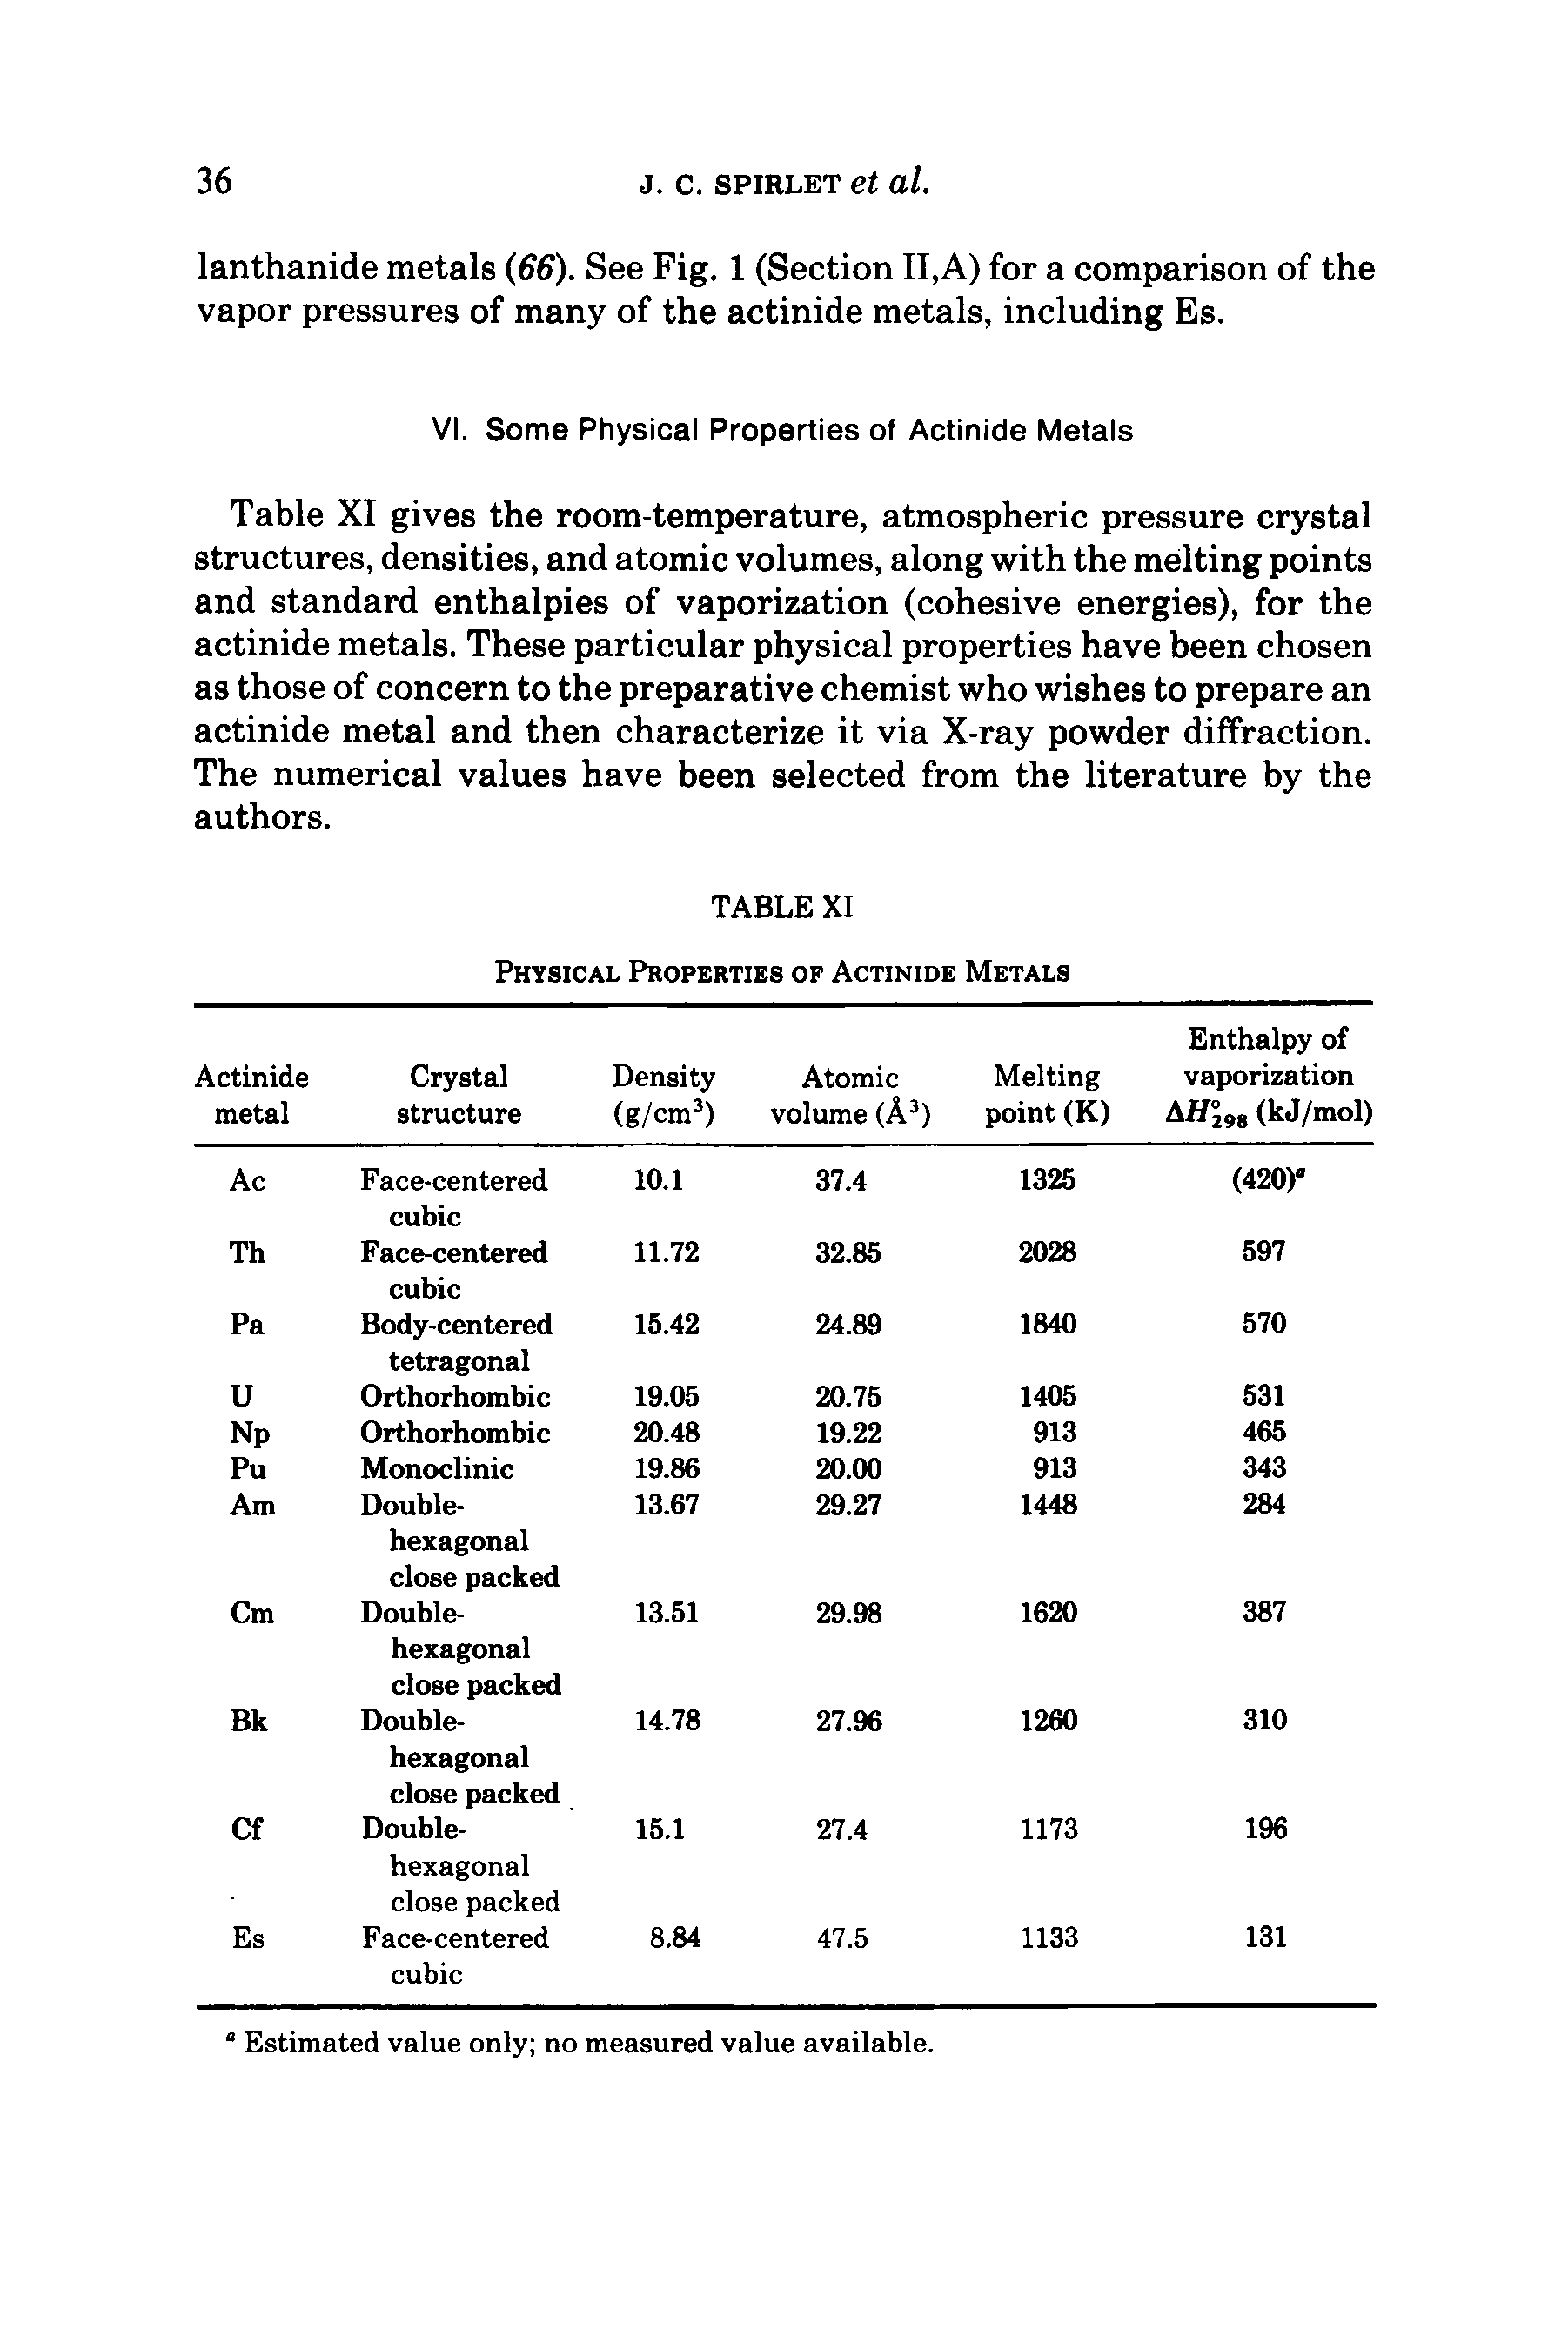 Table XI gives the room-temperature, atmospheric pressure crystal structures, densities, and atomic volumes, along with the melting points and standard enthalpies of vaporization (cohesive energies), for the actinide metals. These particular physical properties have been chosen as those of concern to the preparative chemist who wishes to prepare an actinide metal and then characterize it via X-ray powder diffraction. The numerical values have been selected from the literature by the authors.